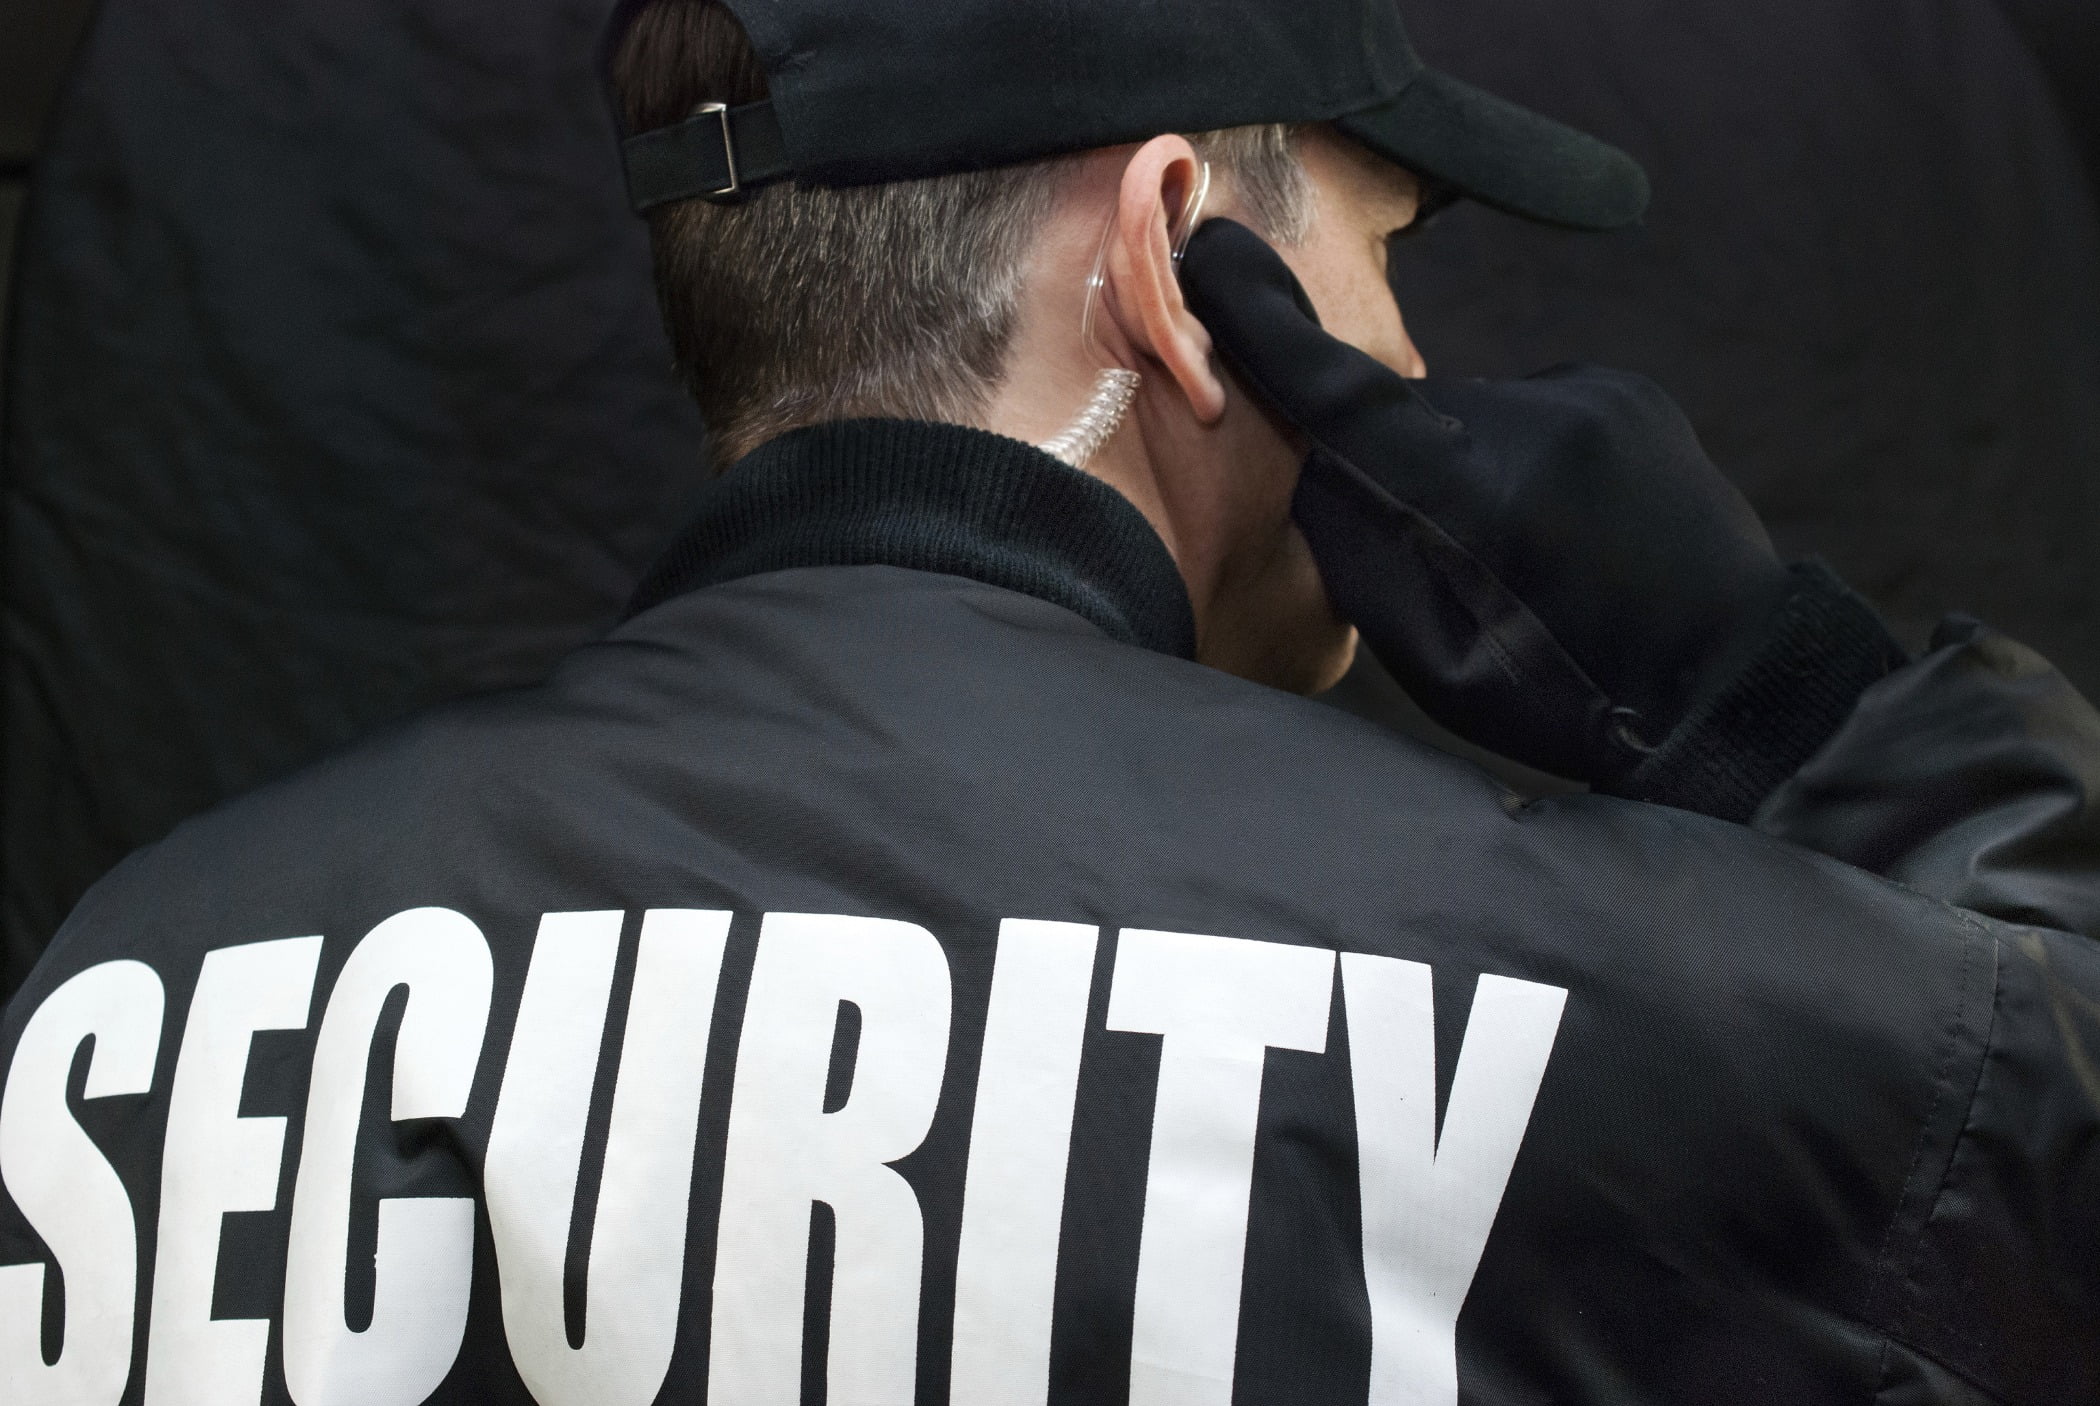 Security Guard Listens To Earpiece, Back of Jacket Showing